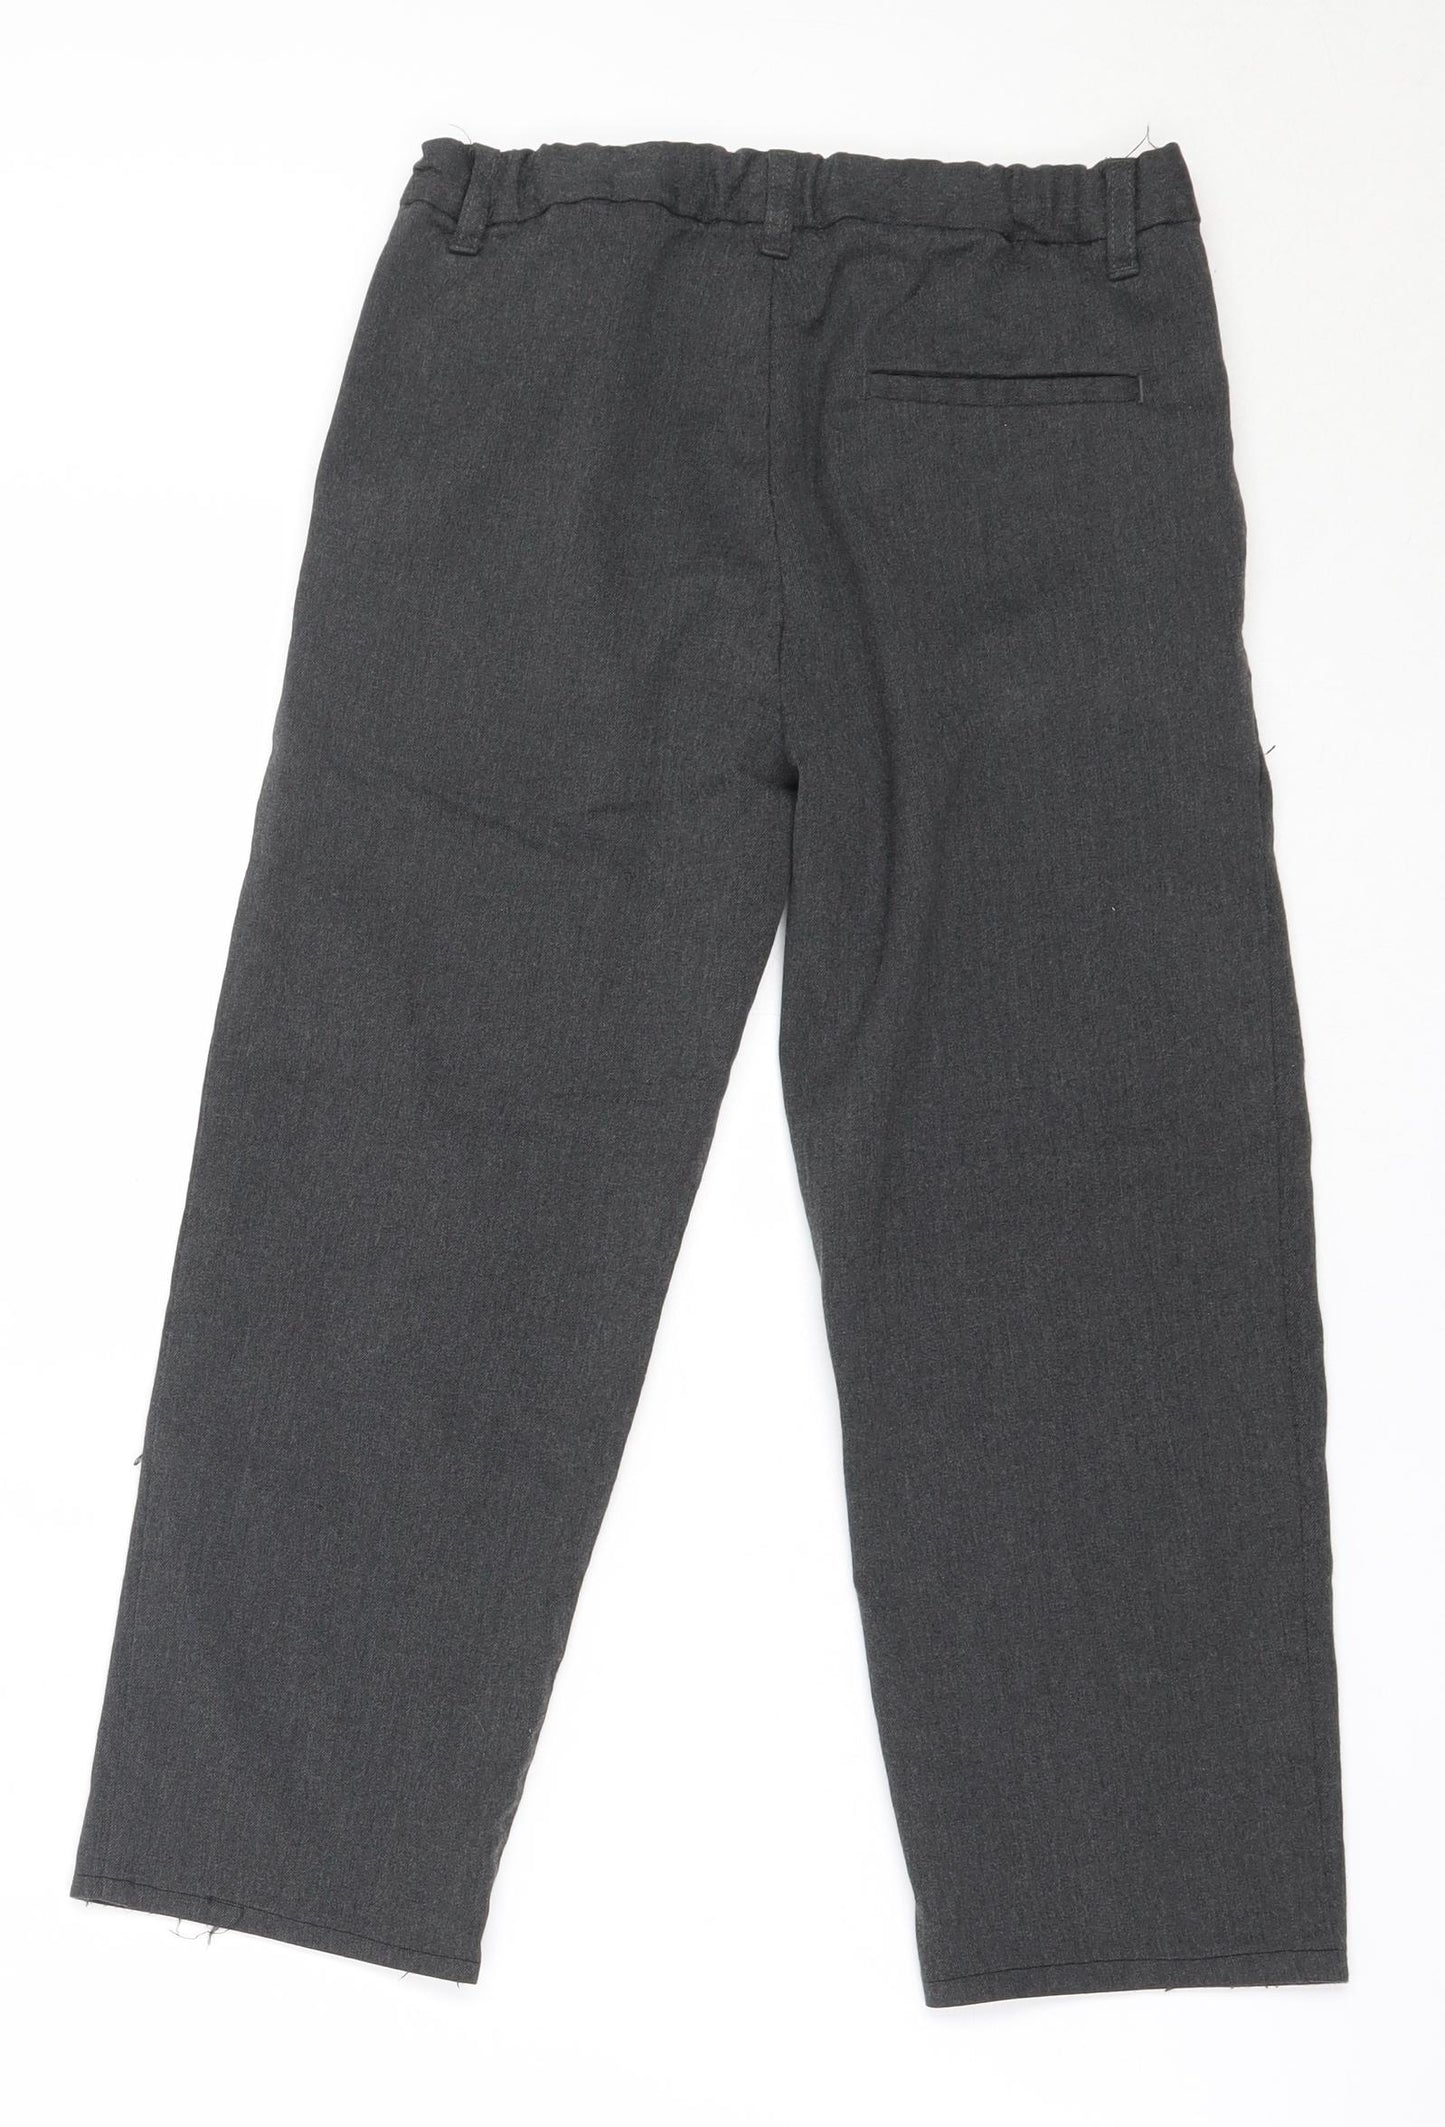 Dunnes Stores Boys Grey  Polyester Dress Pants Trousers Size 9-10 Years  Regular  - school